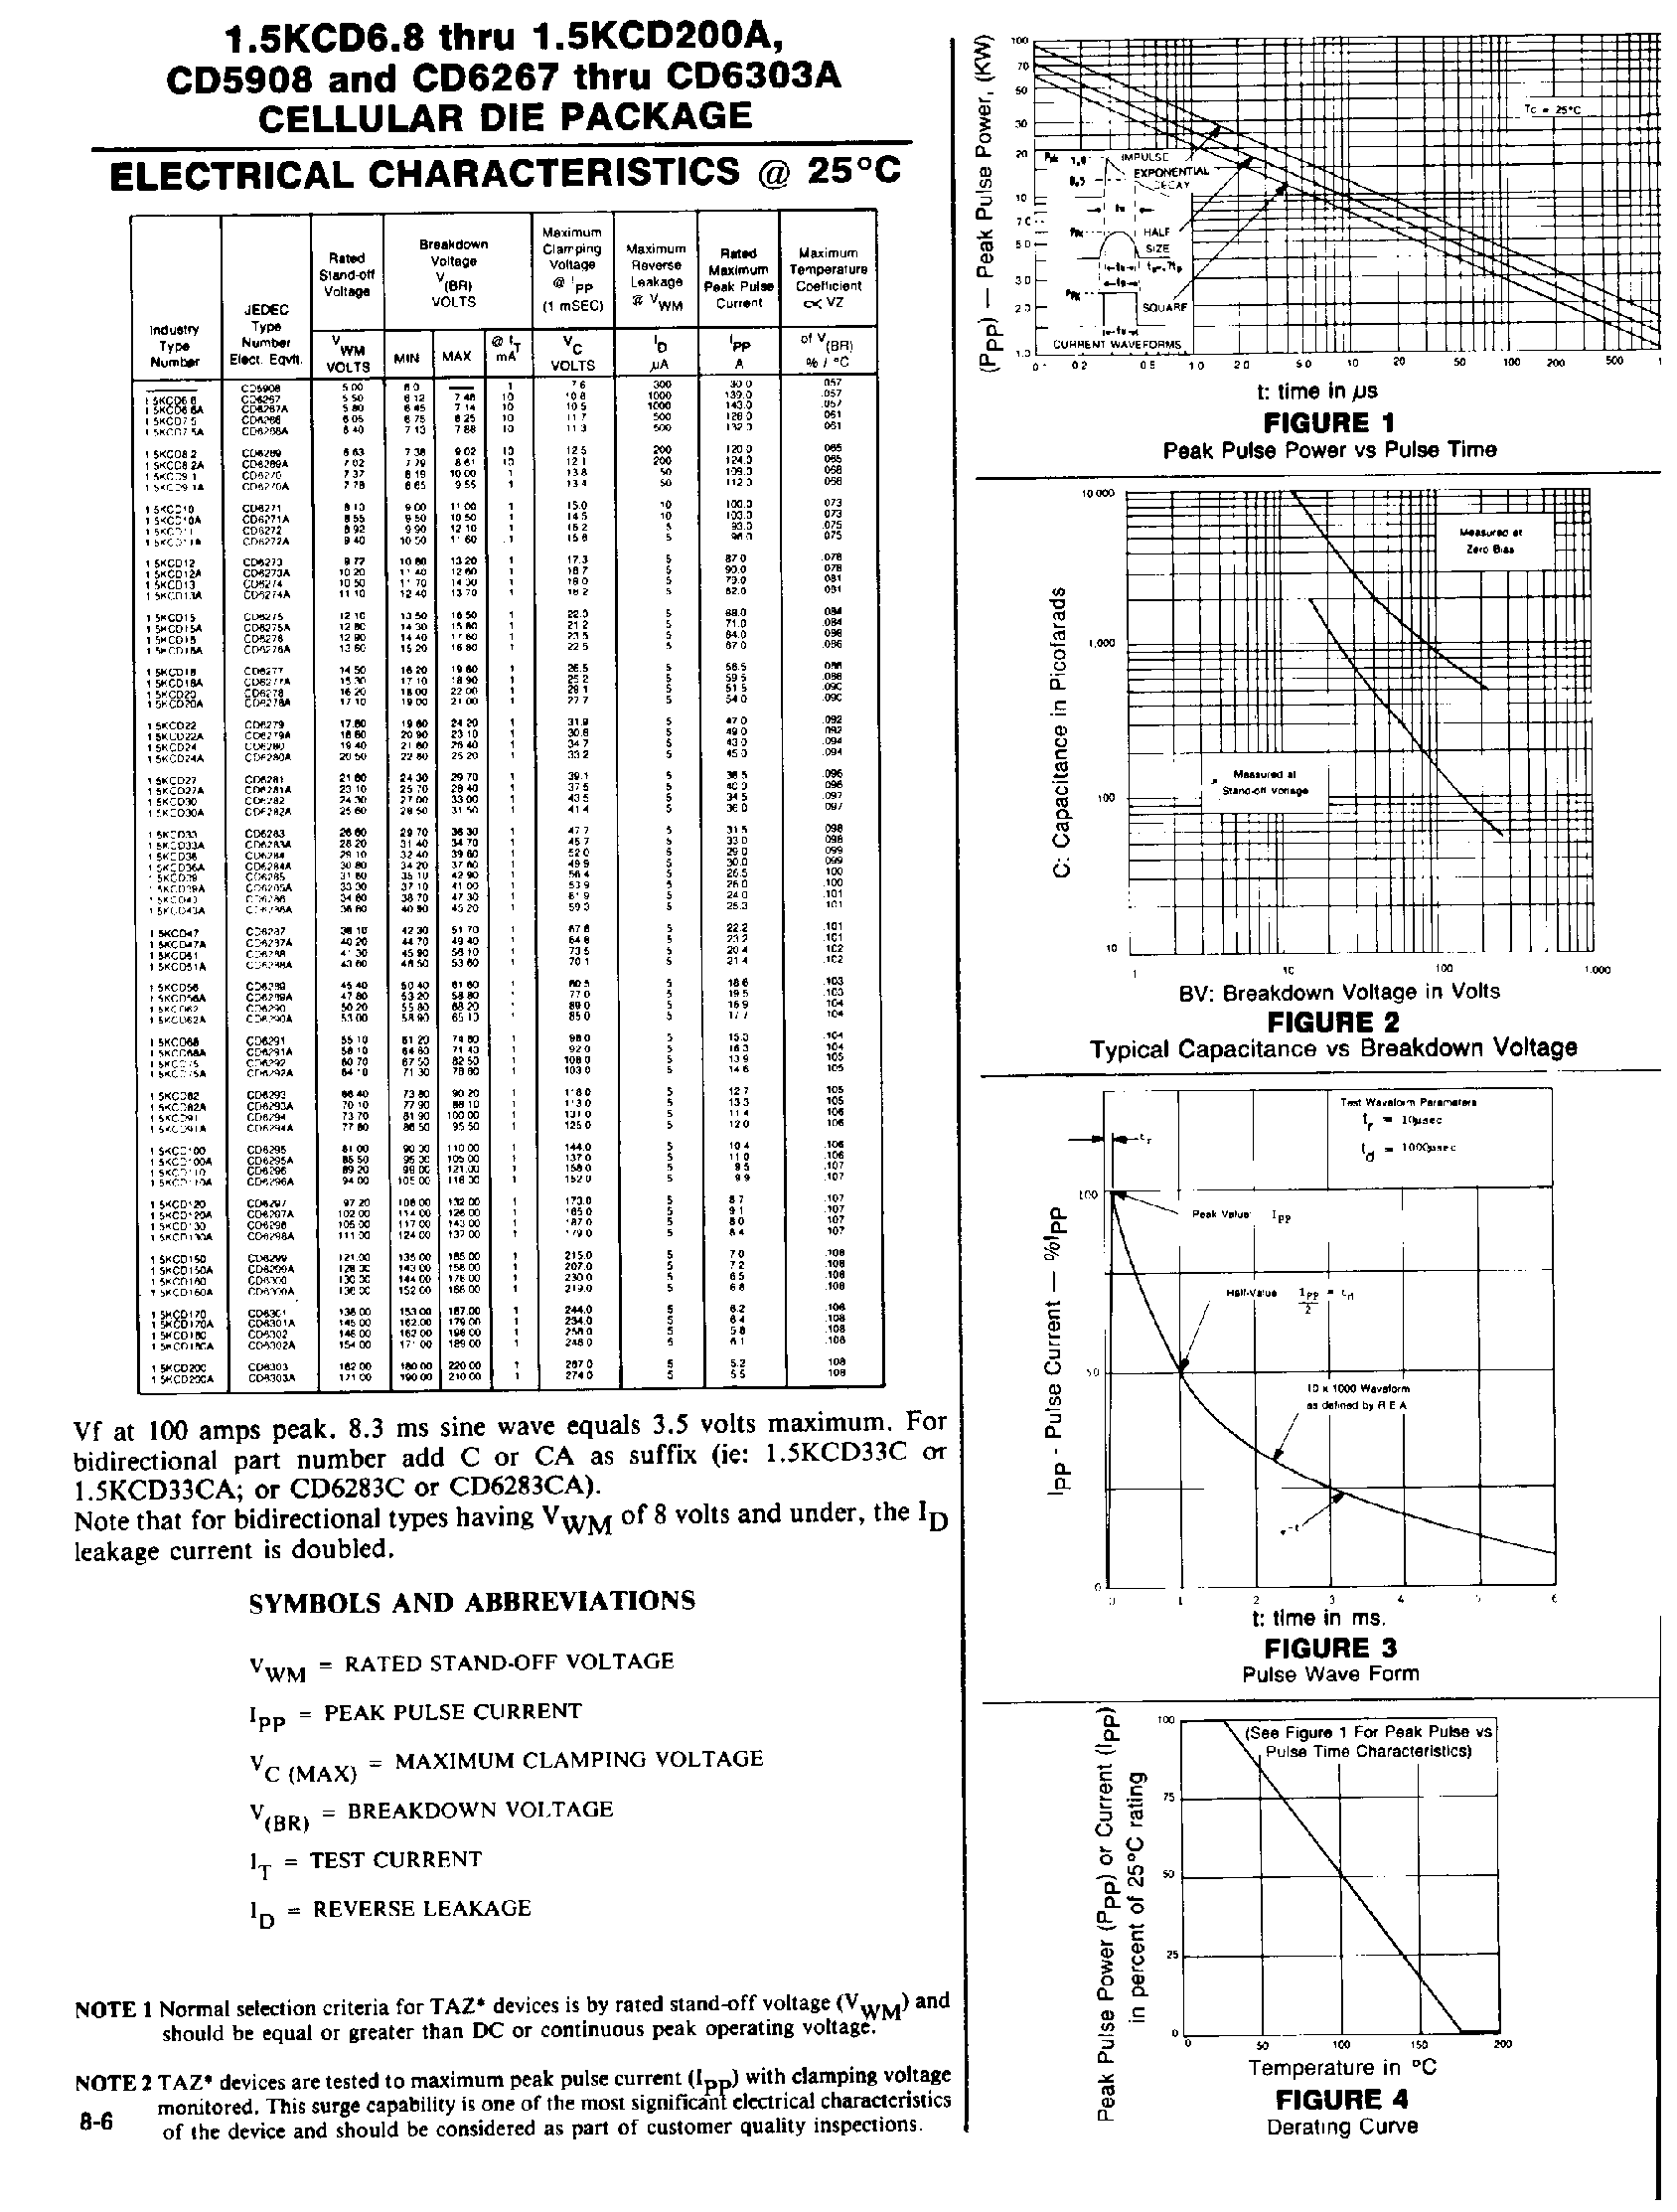 Datasheet CD6287A - Transient suppressor CELLULAR DIE PACKAGE page 2